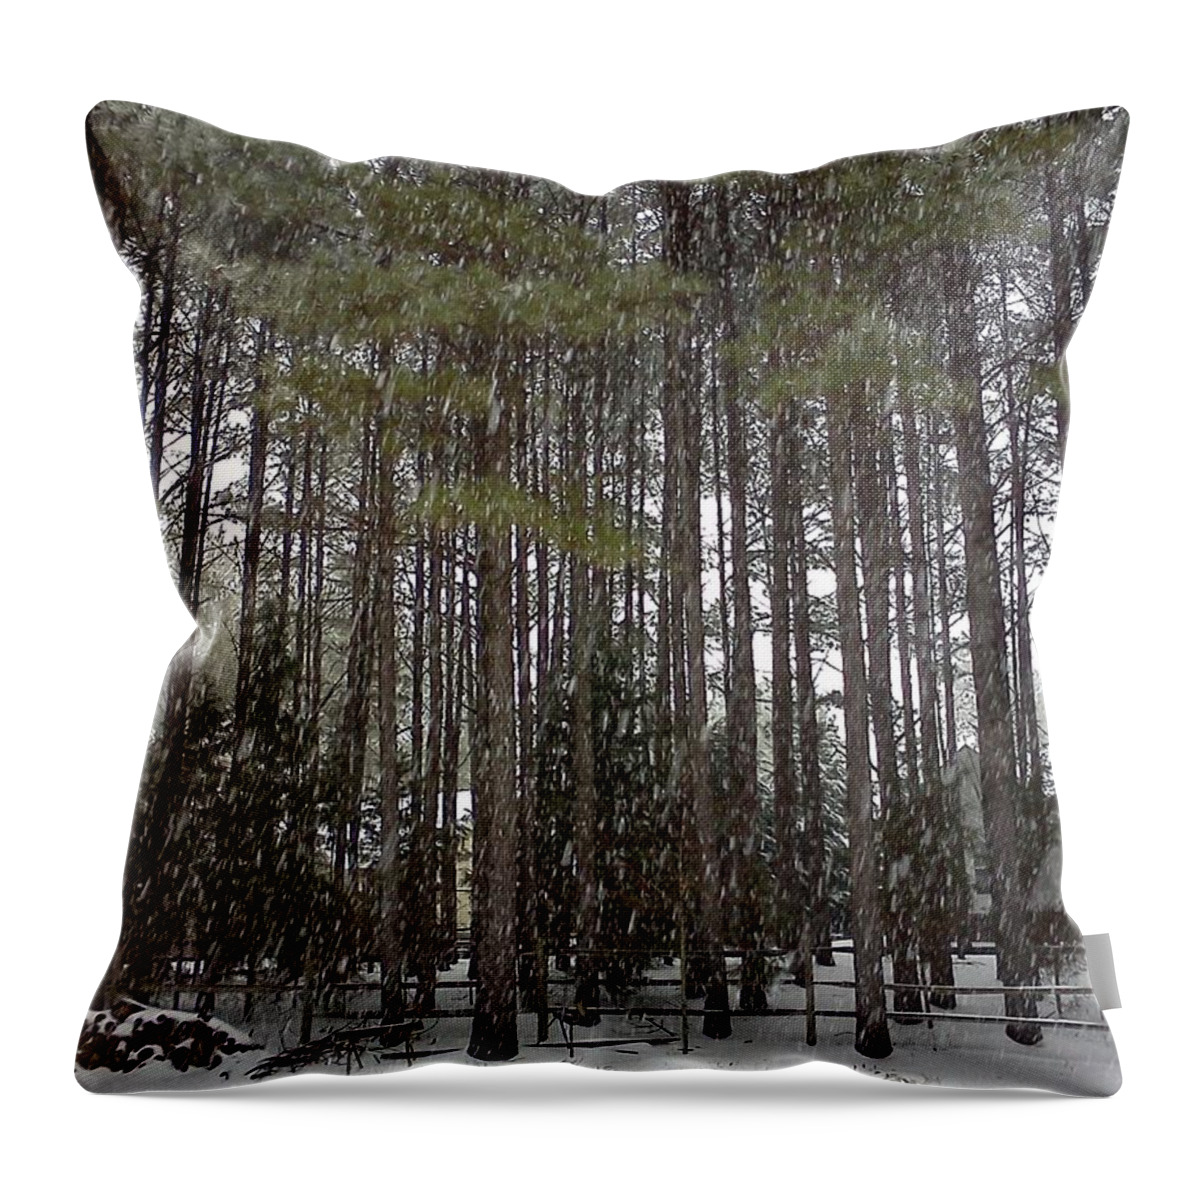 Snow Throw Pillow featuring the photograph Snow on the Pines by Stacy C Bottoms